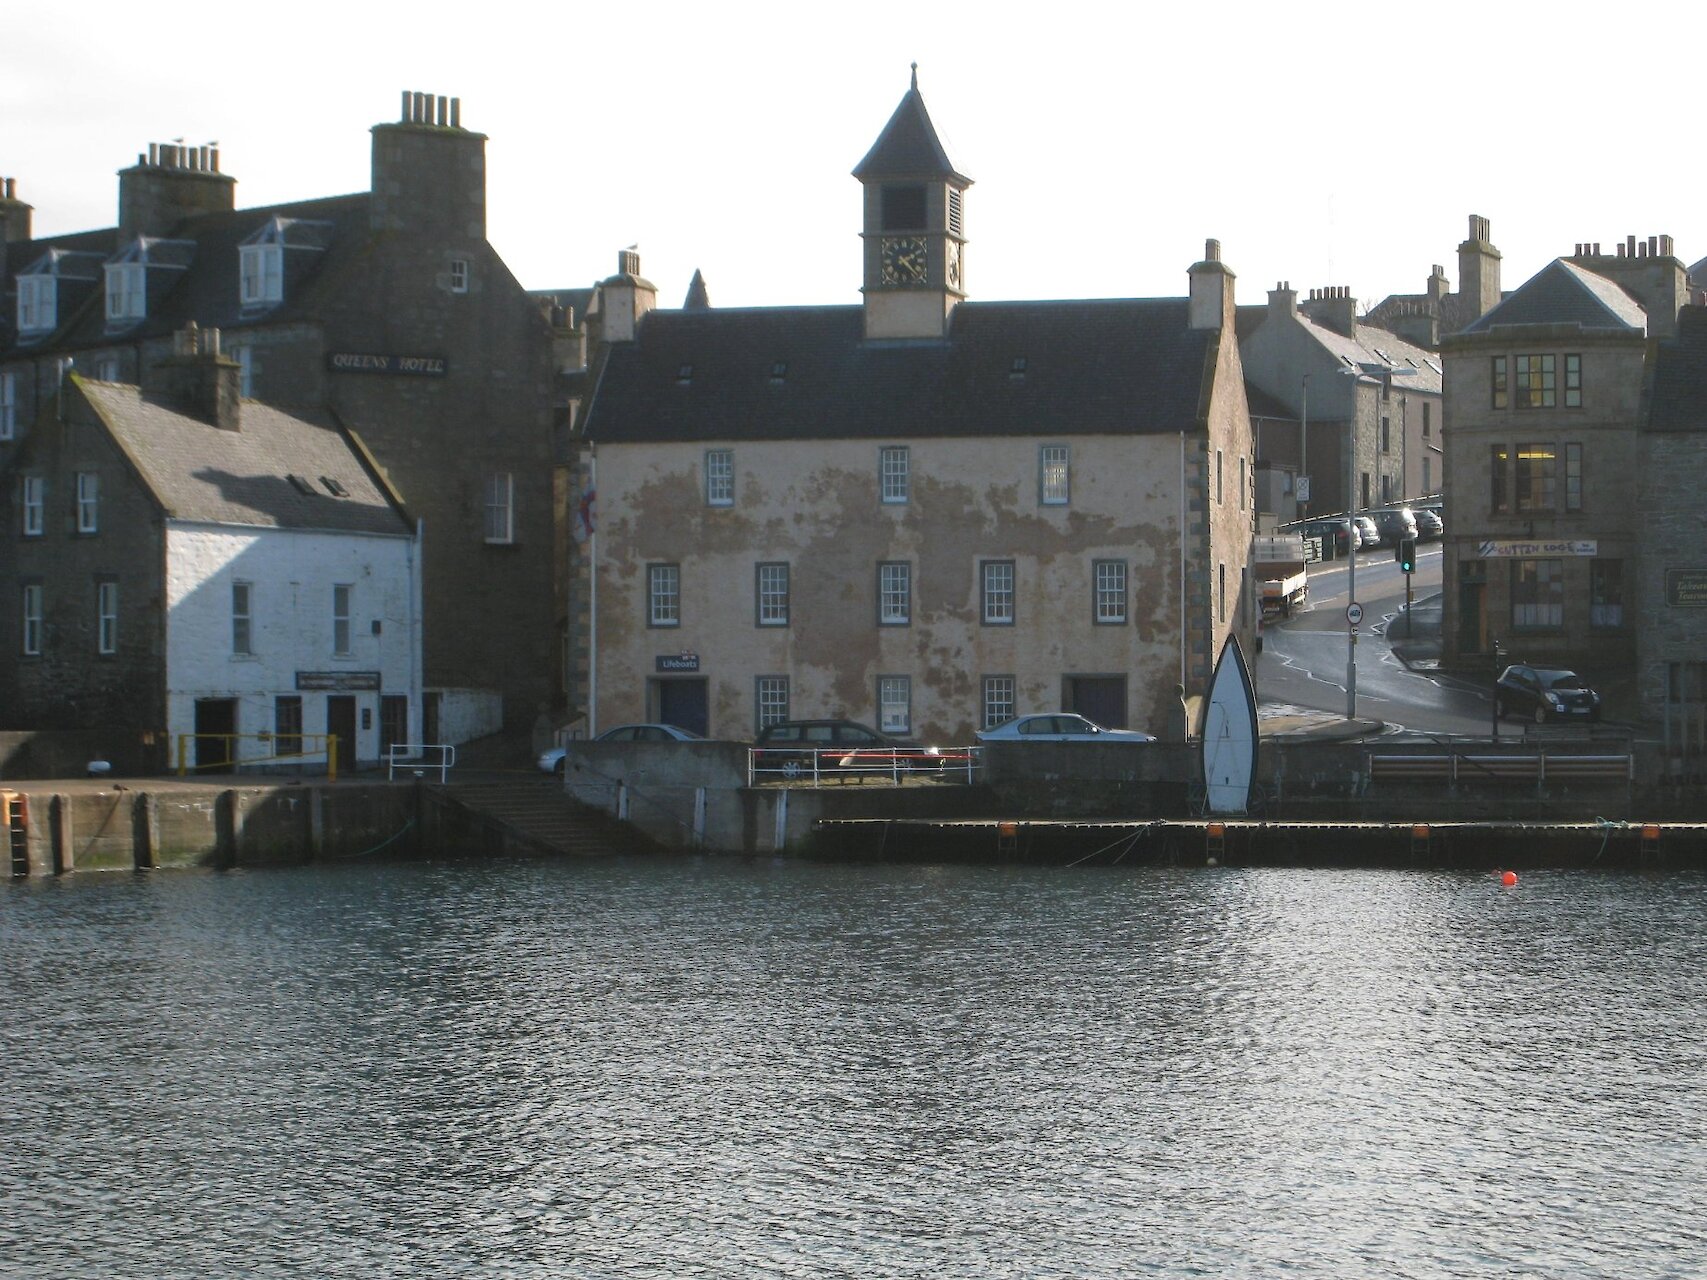 RNLI Base with new clocktower. Arch Henderson provided structural design for this heritage building.